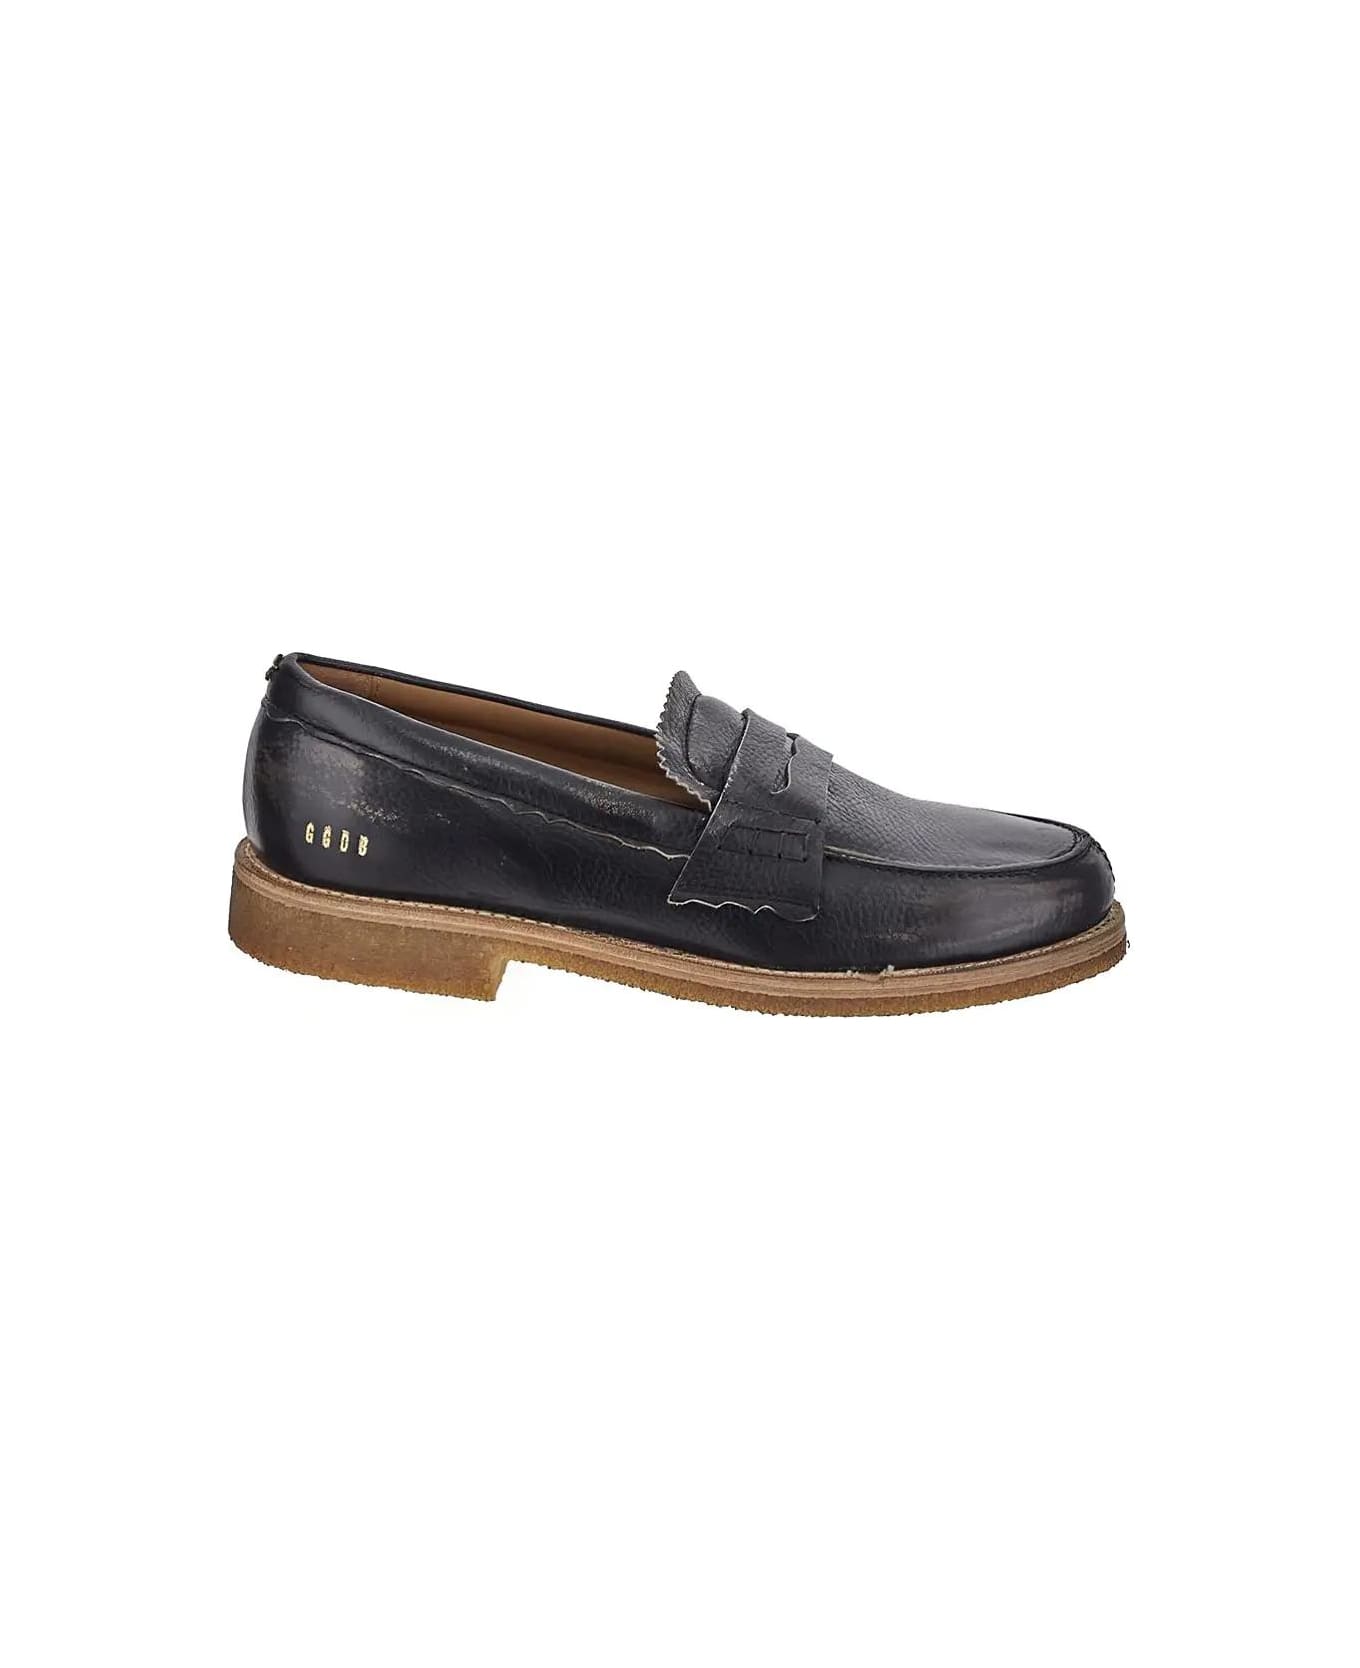 Golden Goose Classic Loafer - Brown